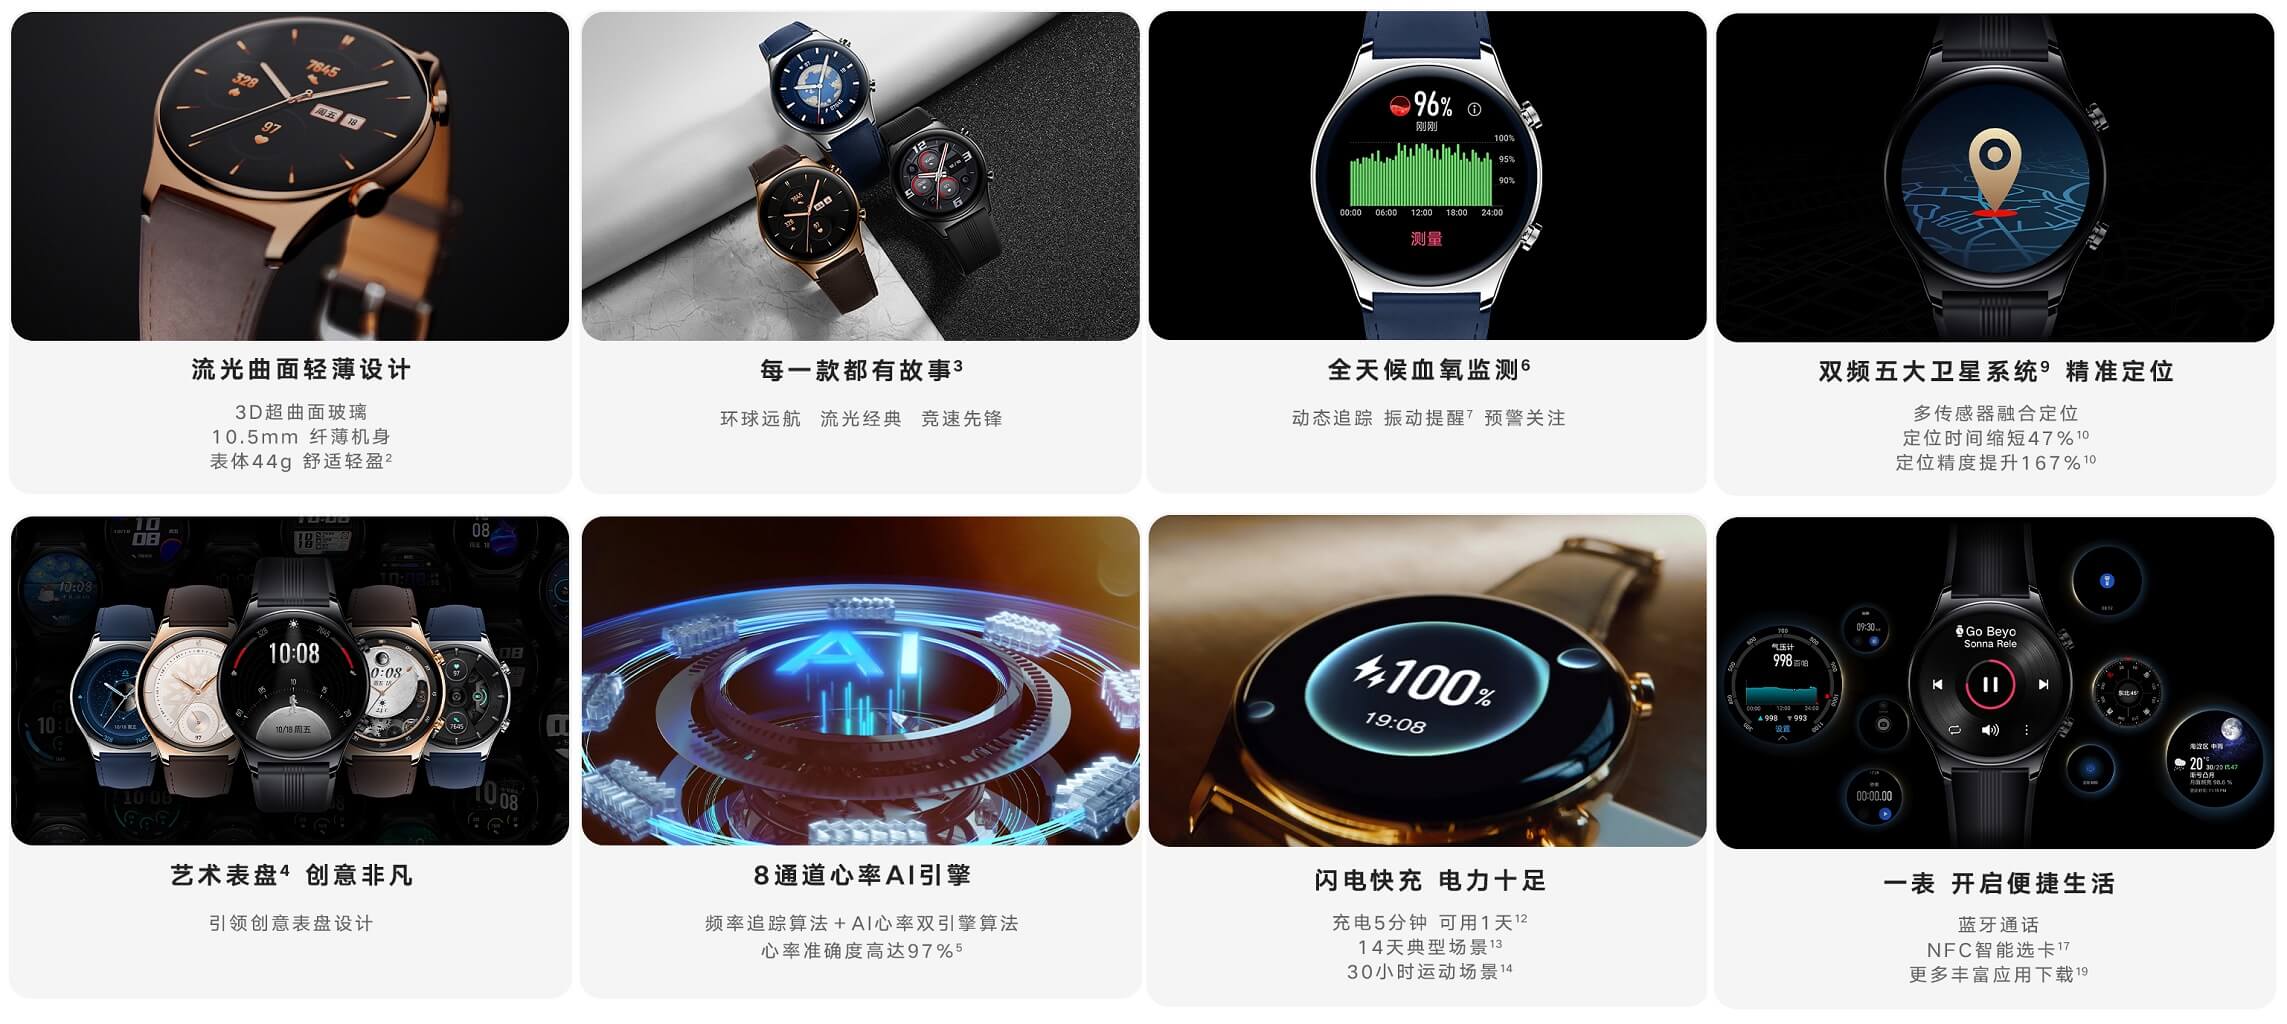 HONOR Watch GS 3 features